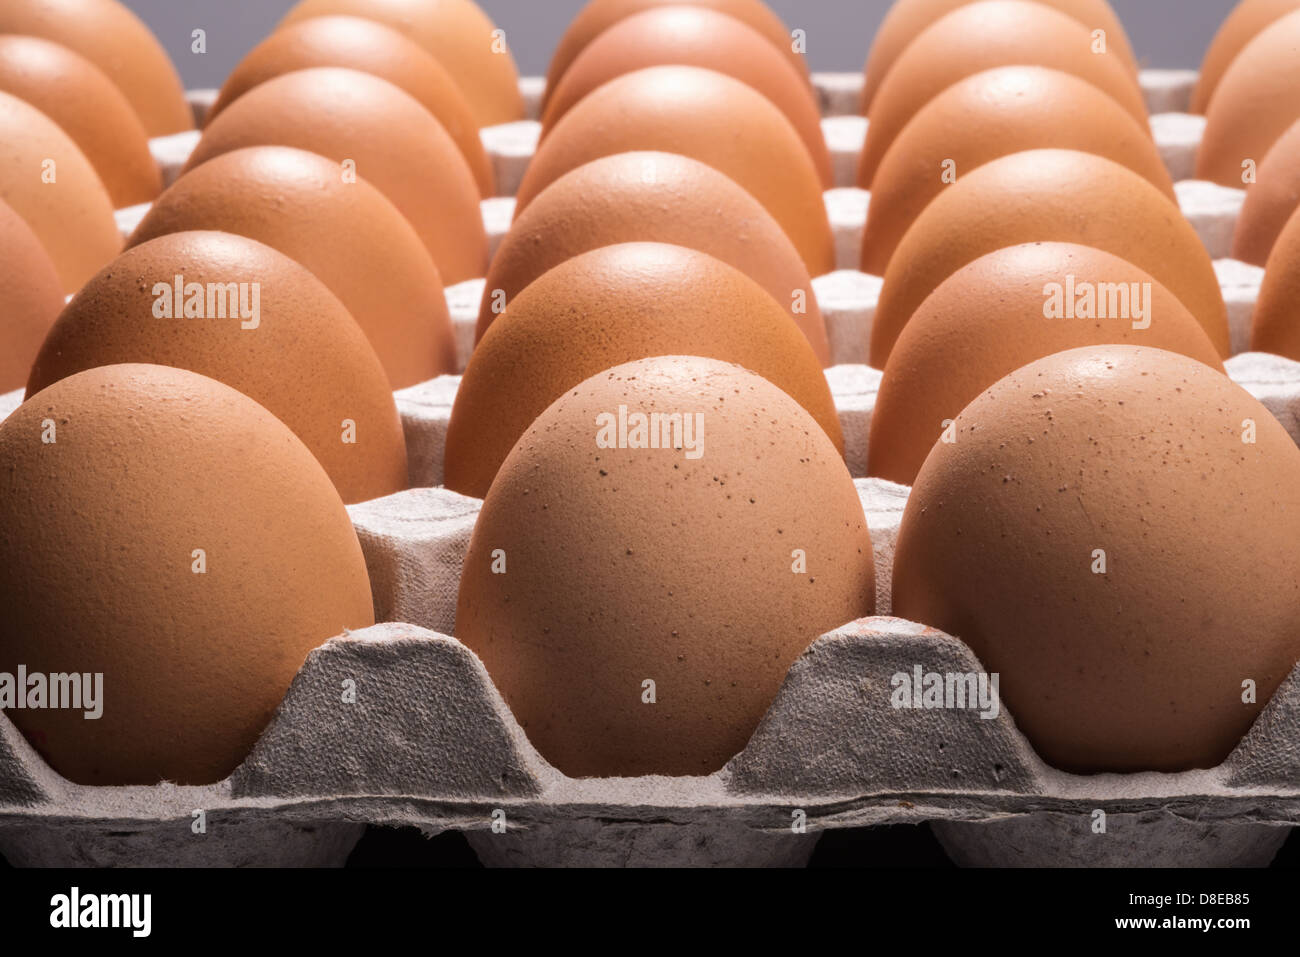 Various views of hens' eggs in a tray. Stock Photo